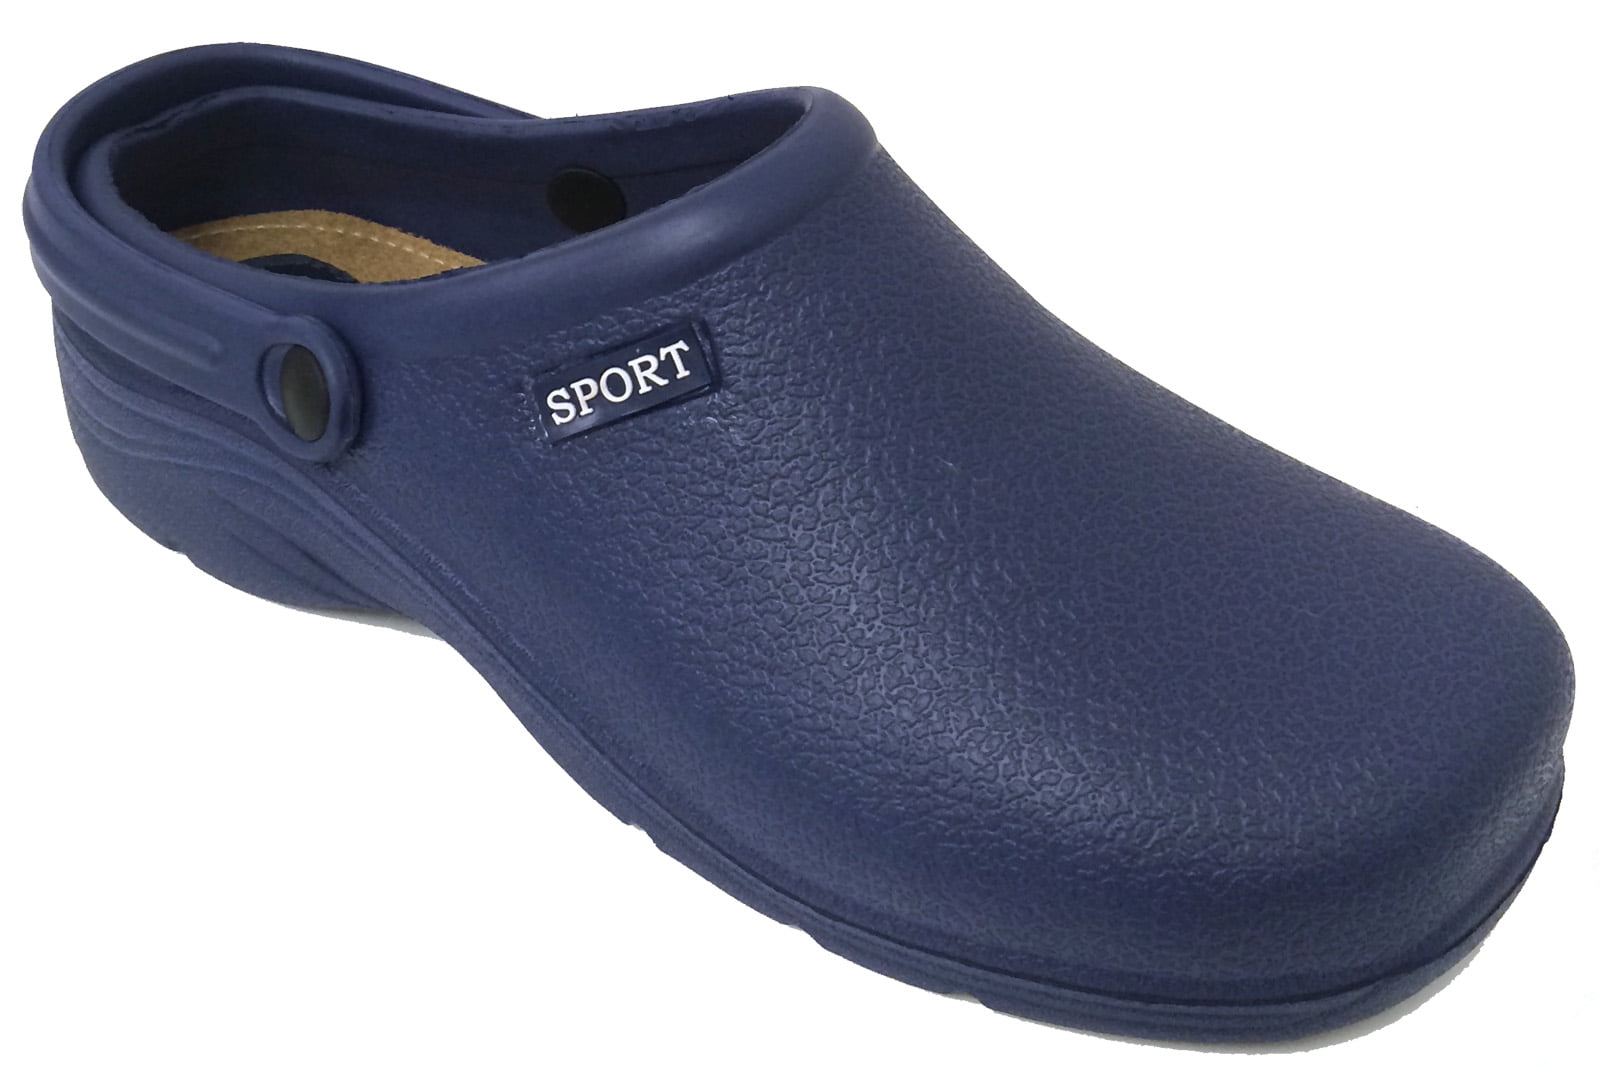 Sizes Town & Country Mens/Womens Gardening Super Soft Clogs/Cloggies Lightweight with Cushioned Insole